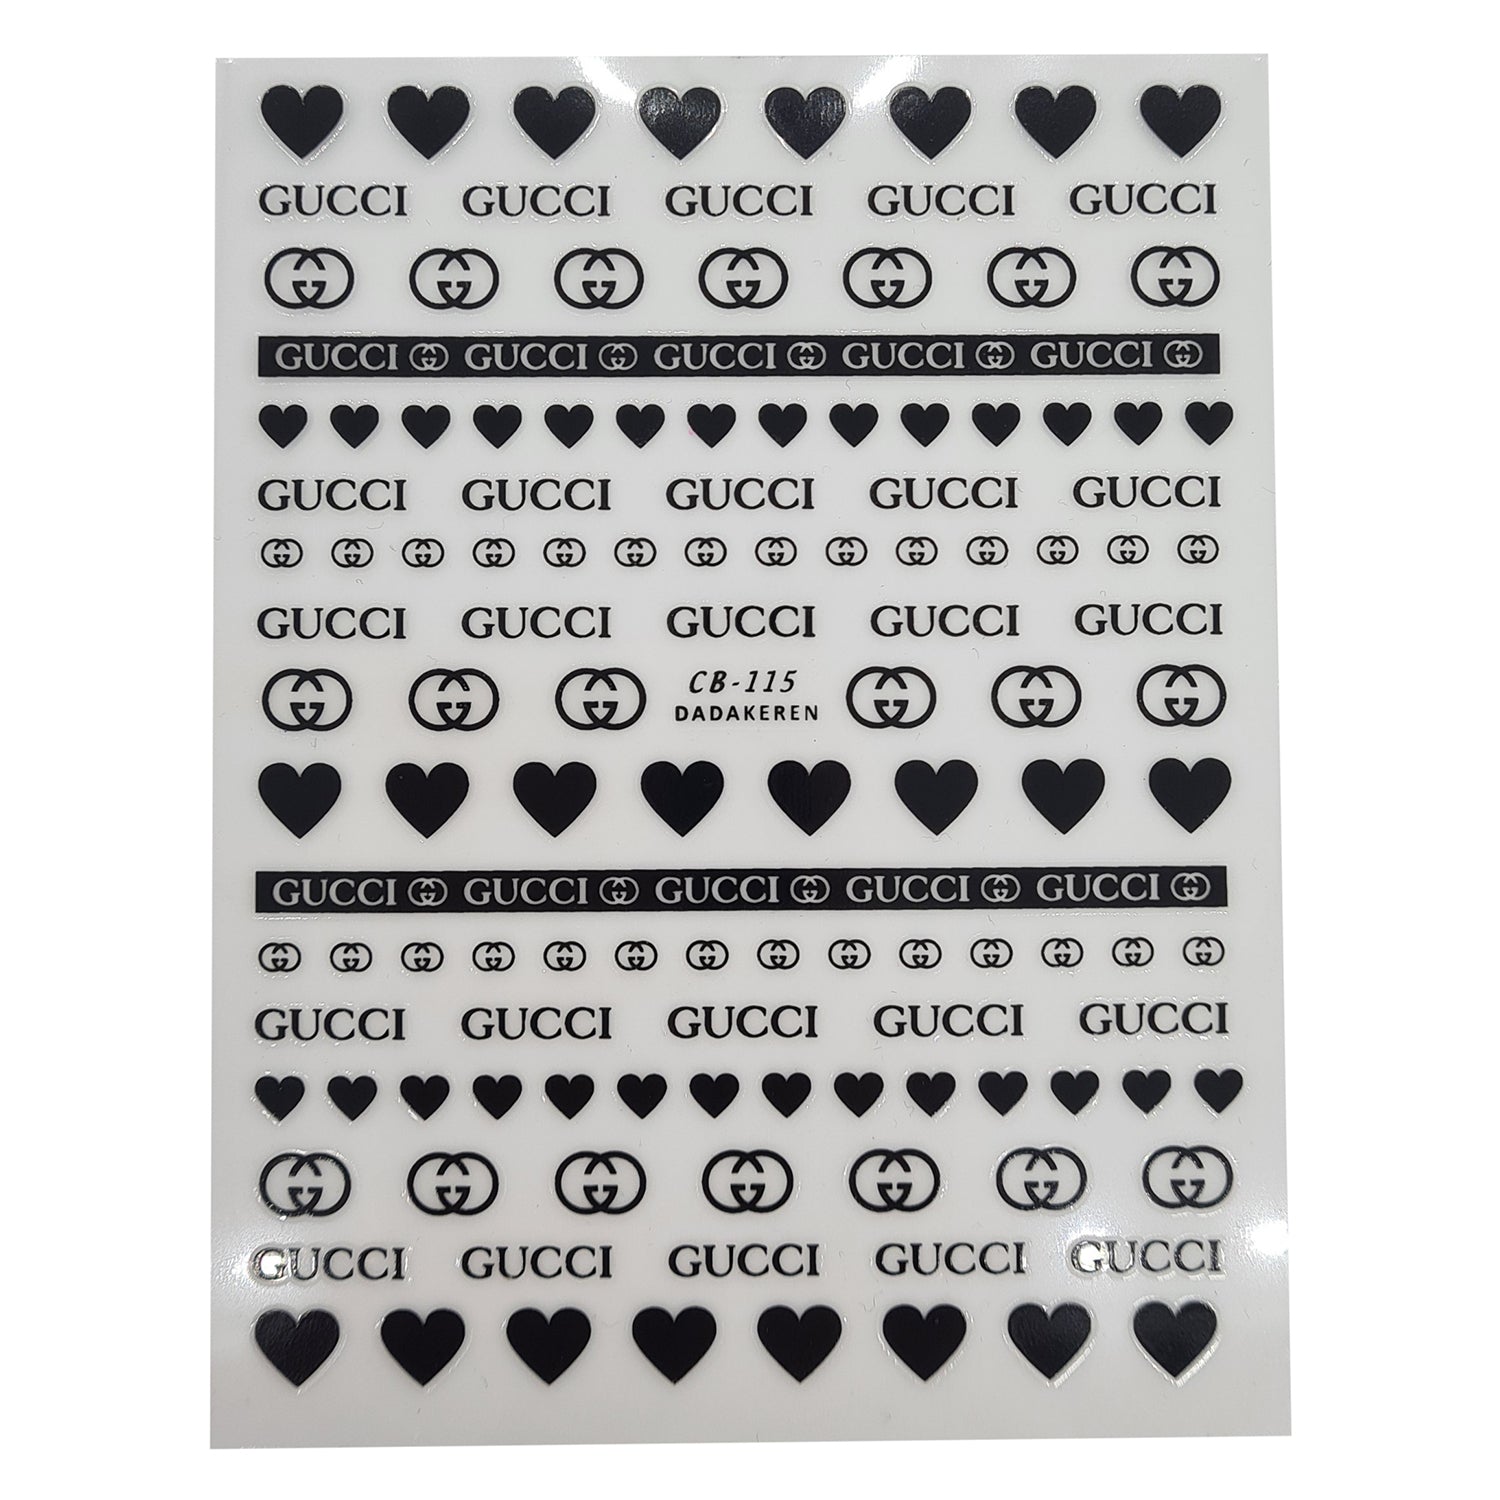 Flower Nail Stickers,Black Rose Nail Art Stickers Decals 3D Self-Adhesive Nail  Art Supplies 8 Sheets Flower Abstract Face Unicorn Designs Designers Nail  Decals for Acrylic Nails Manicure Tips : Amazon.in: Beauty